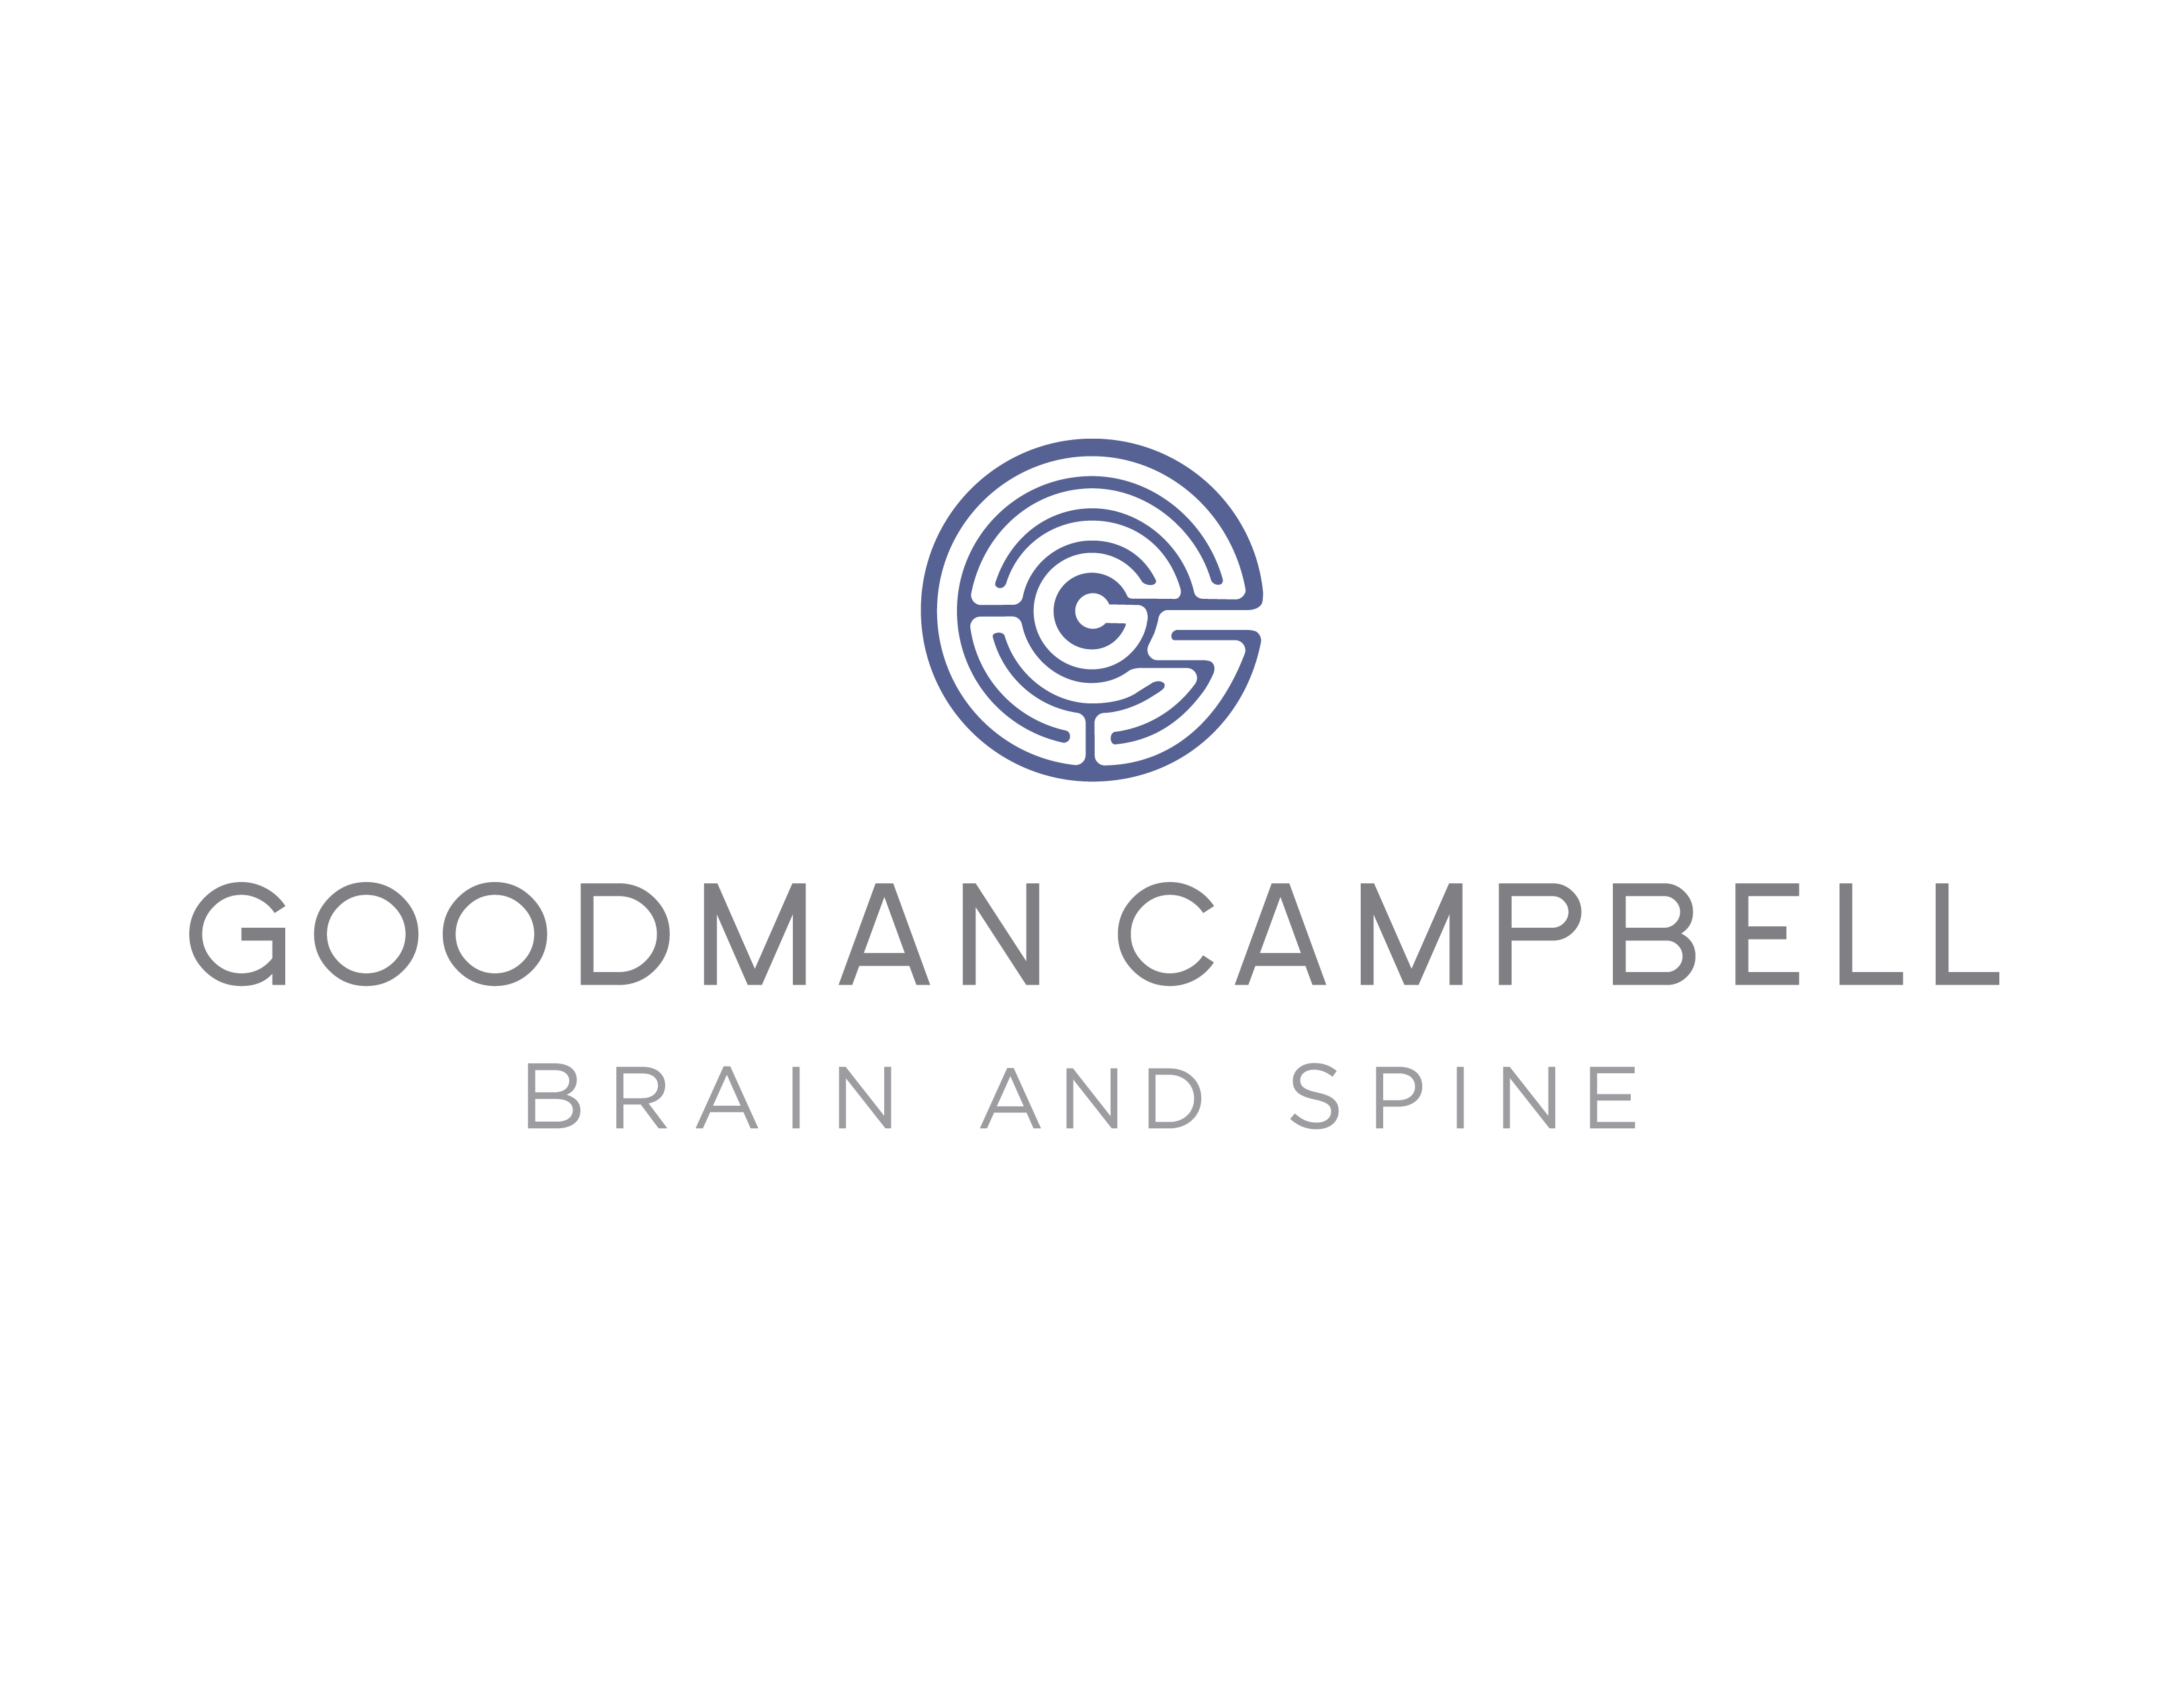 Goodman Campbell Brain and Spine